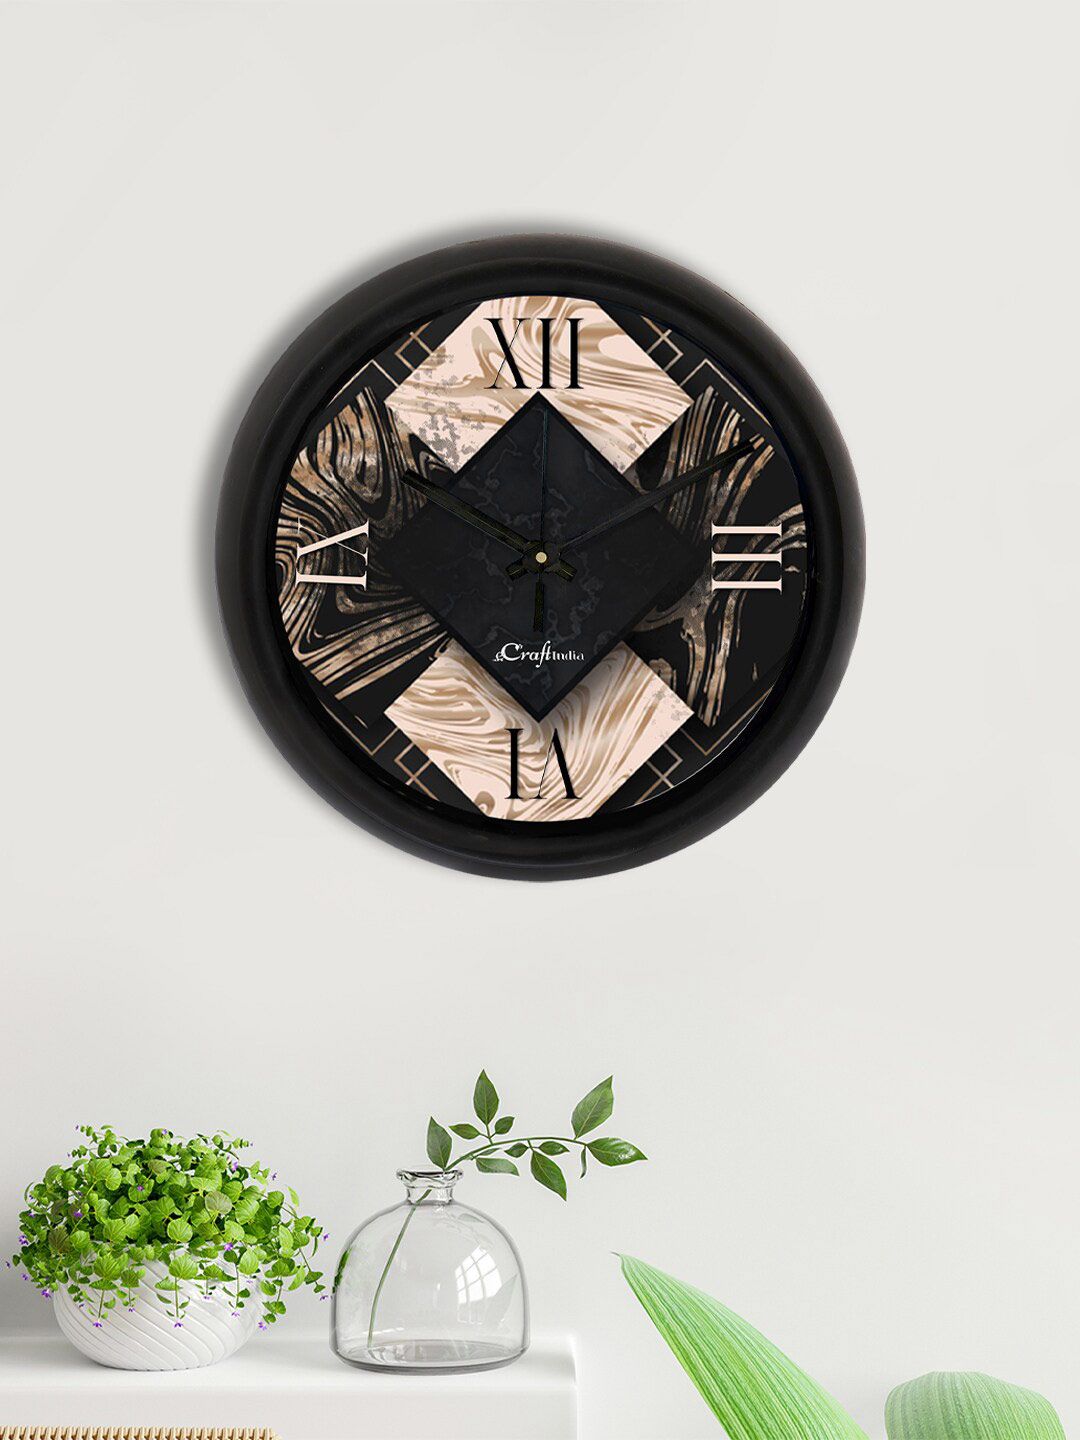 eCraftIndia Black & Beige Printed Contemporary Analogue Wall Clock Price in India